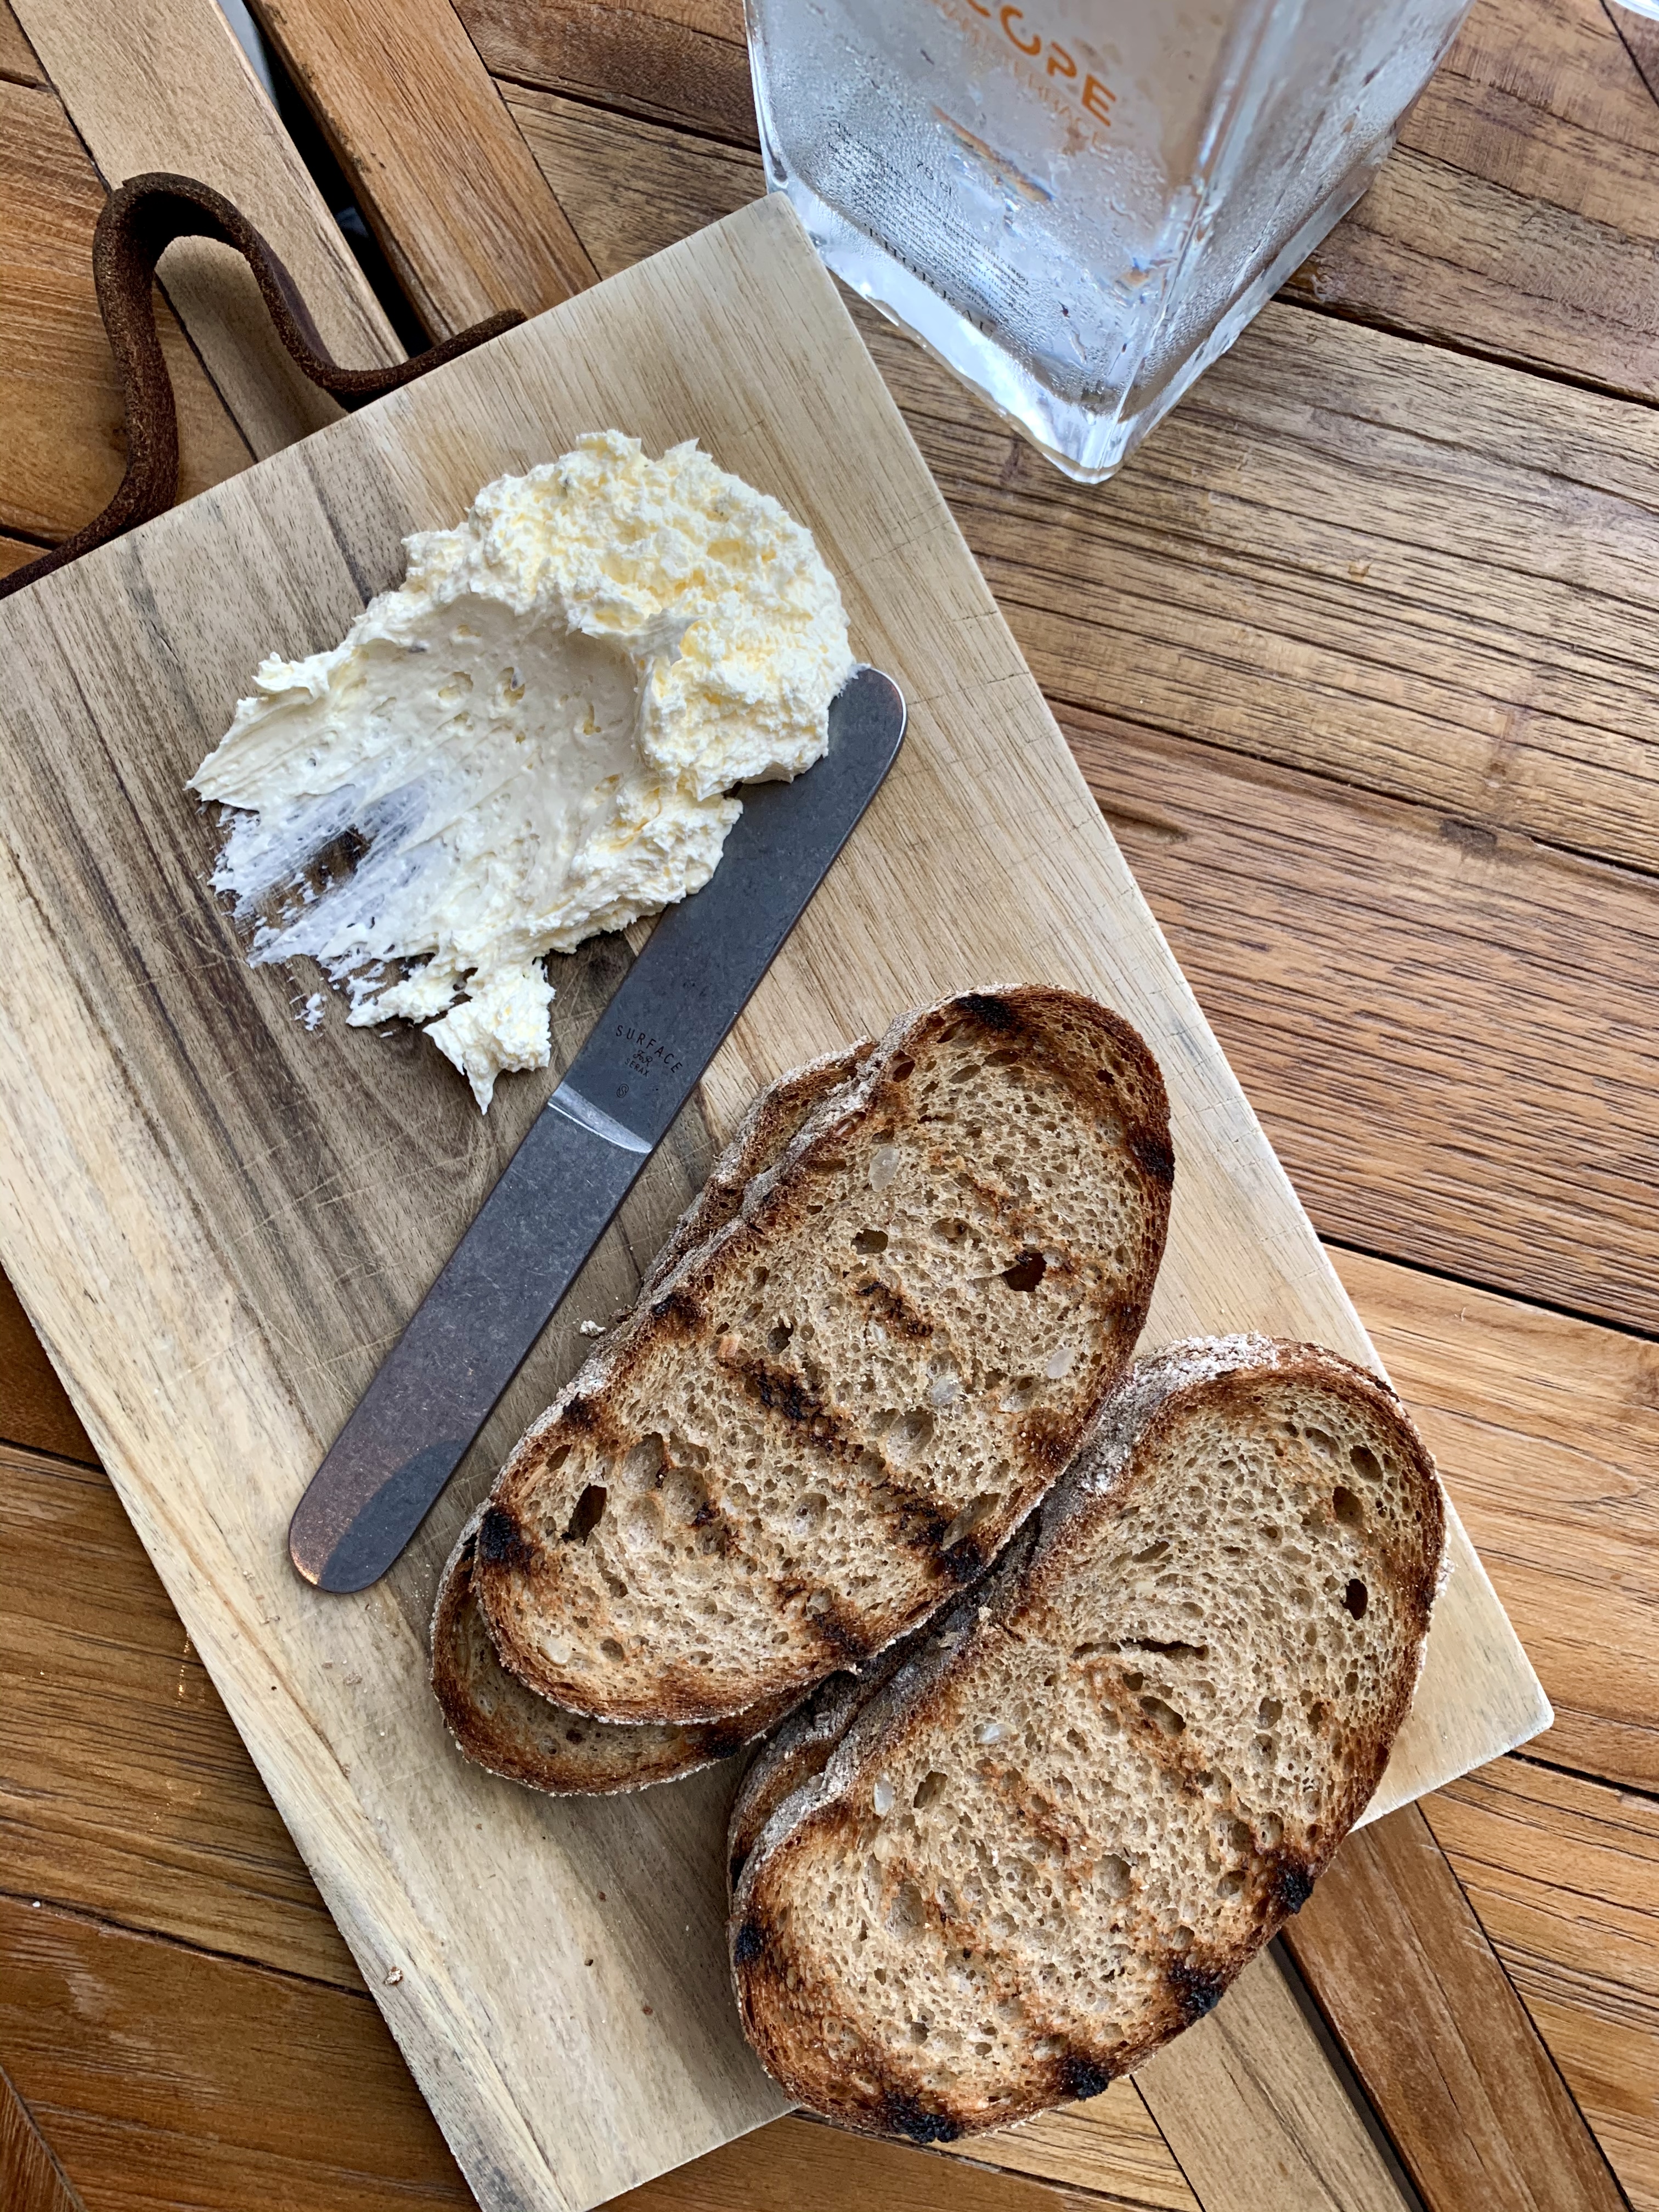 Appetizer with toasted bread and whipped butter